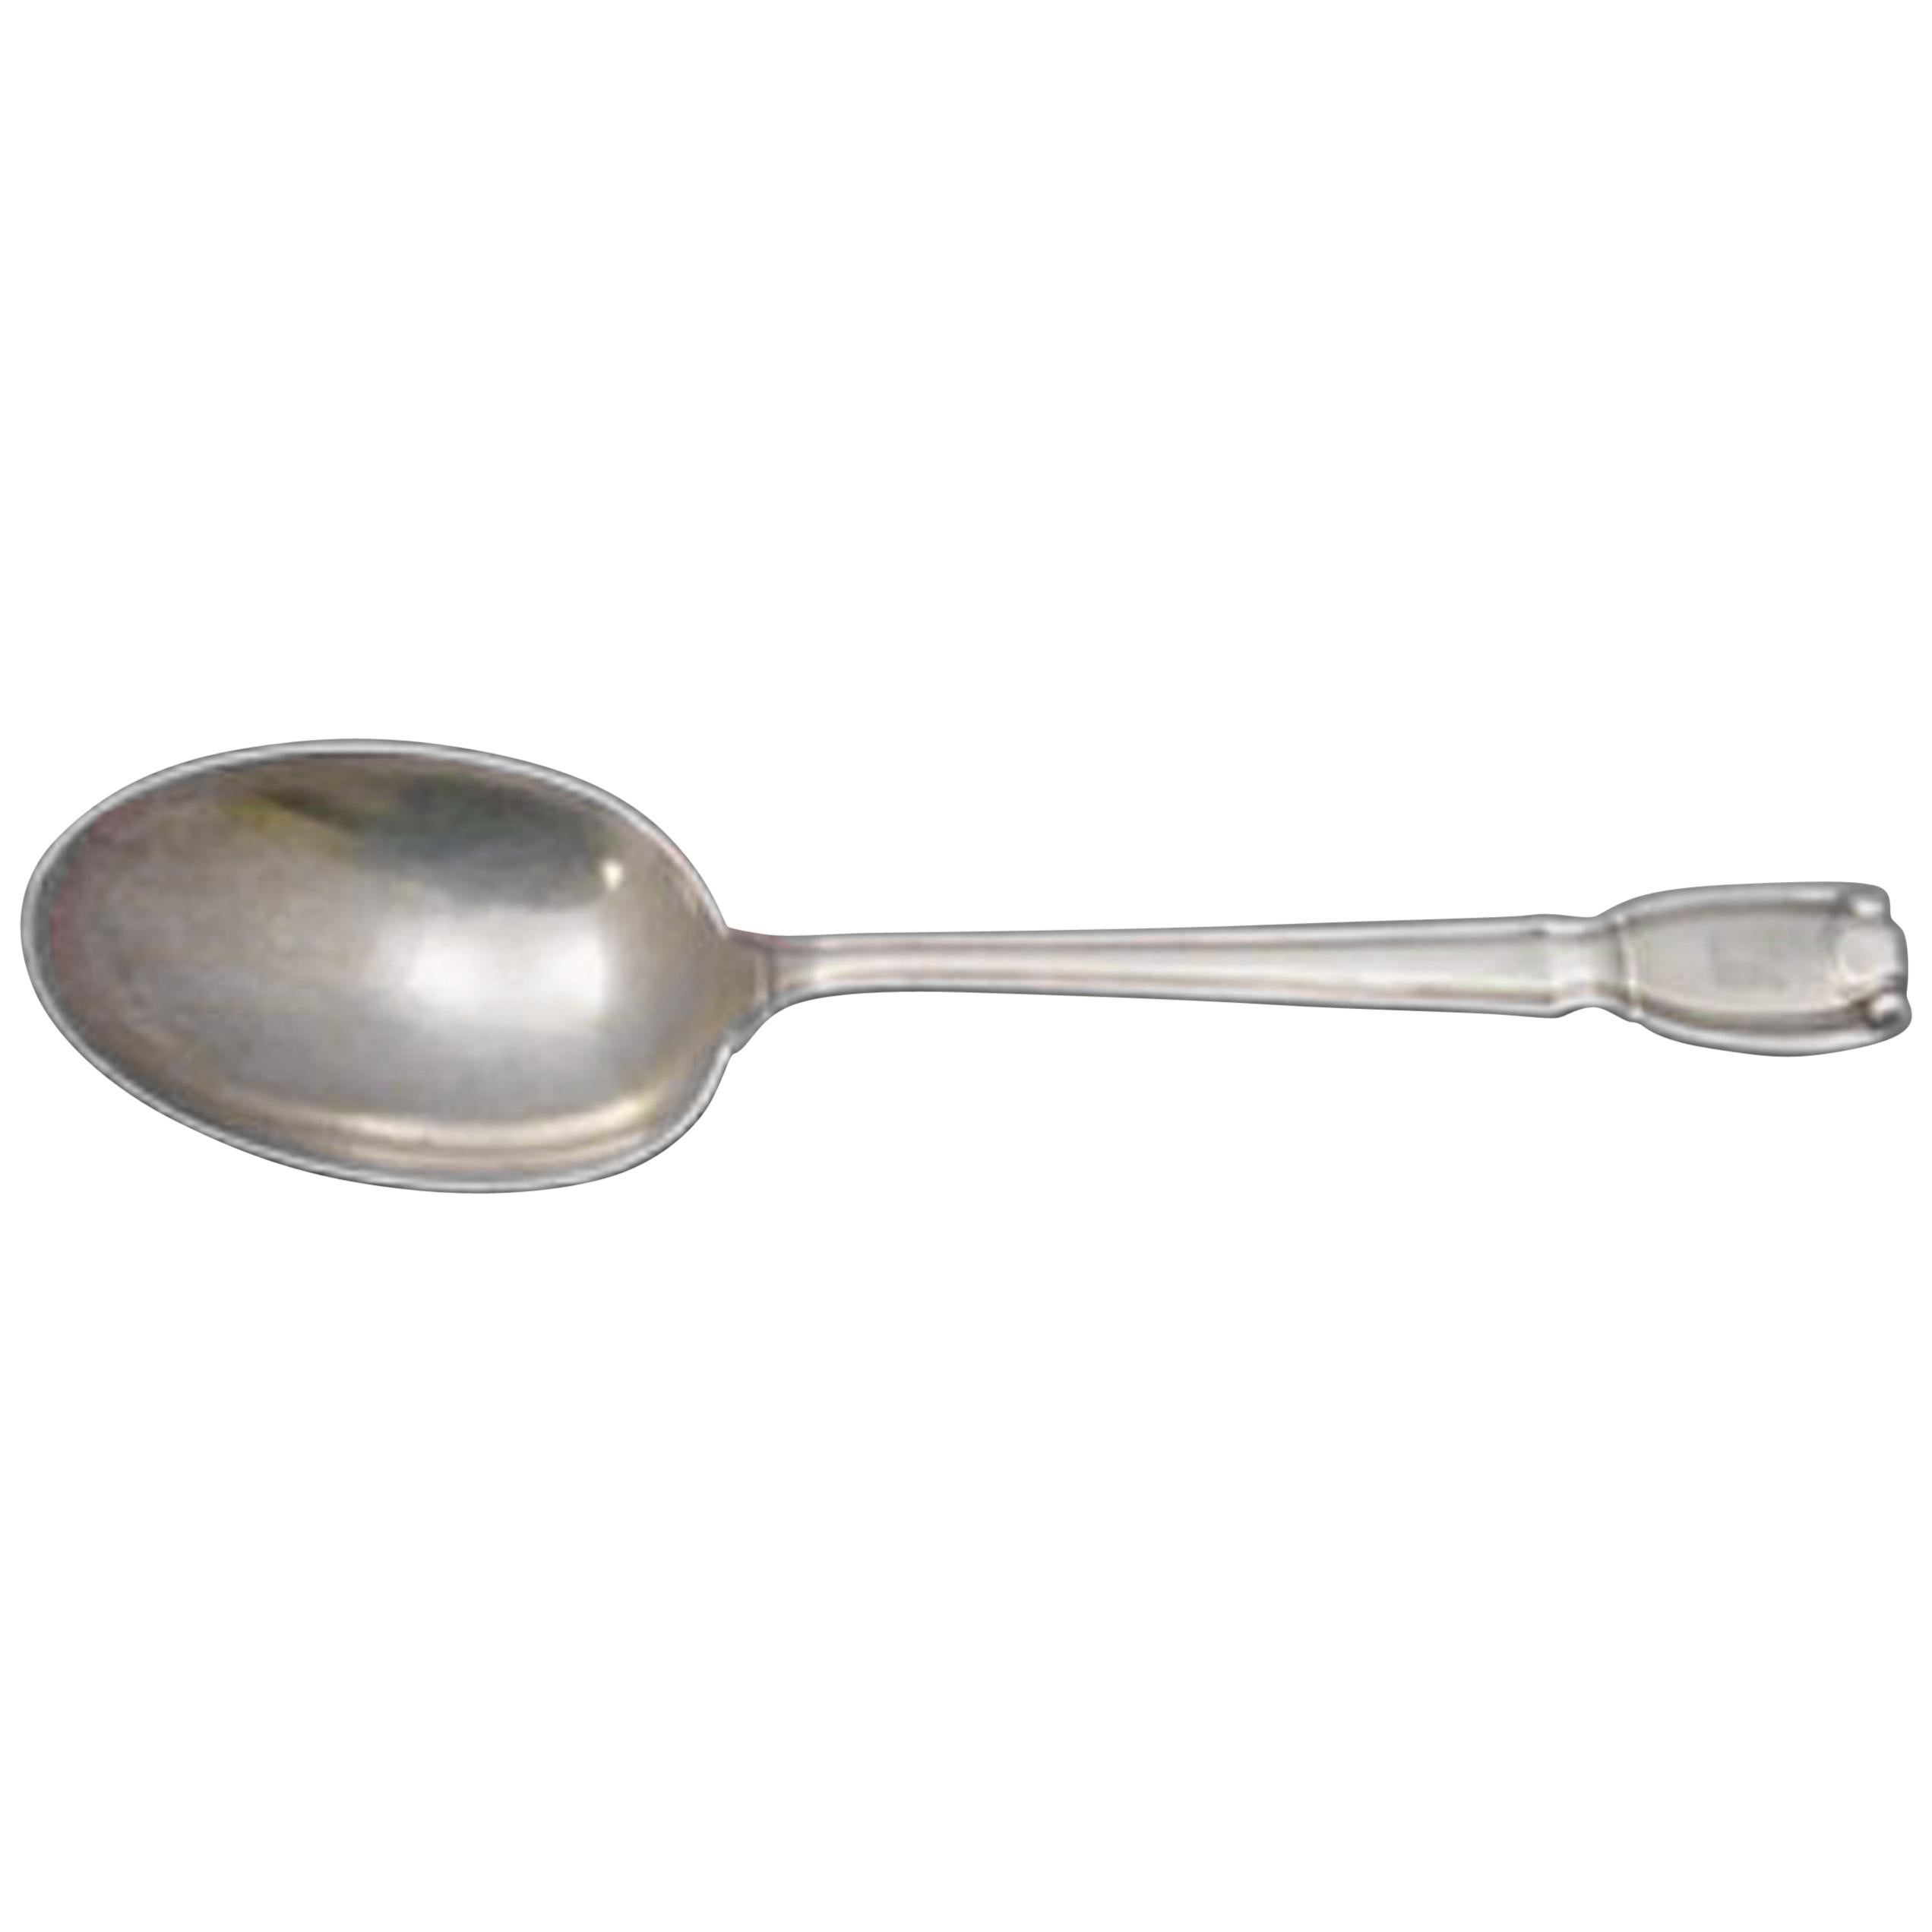 Castilian by Tiffany & Co. Sterling Silver Vegetable Serving Spoon